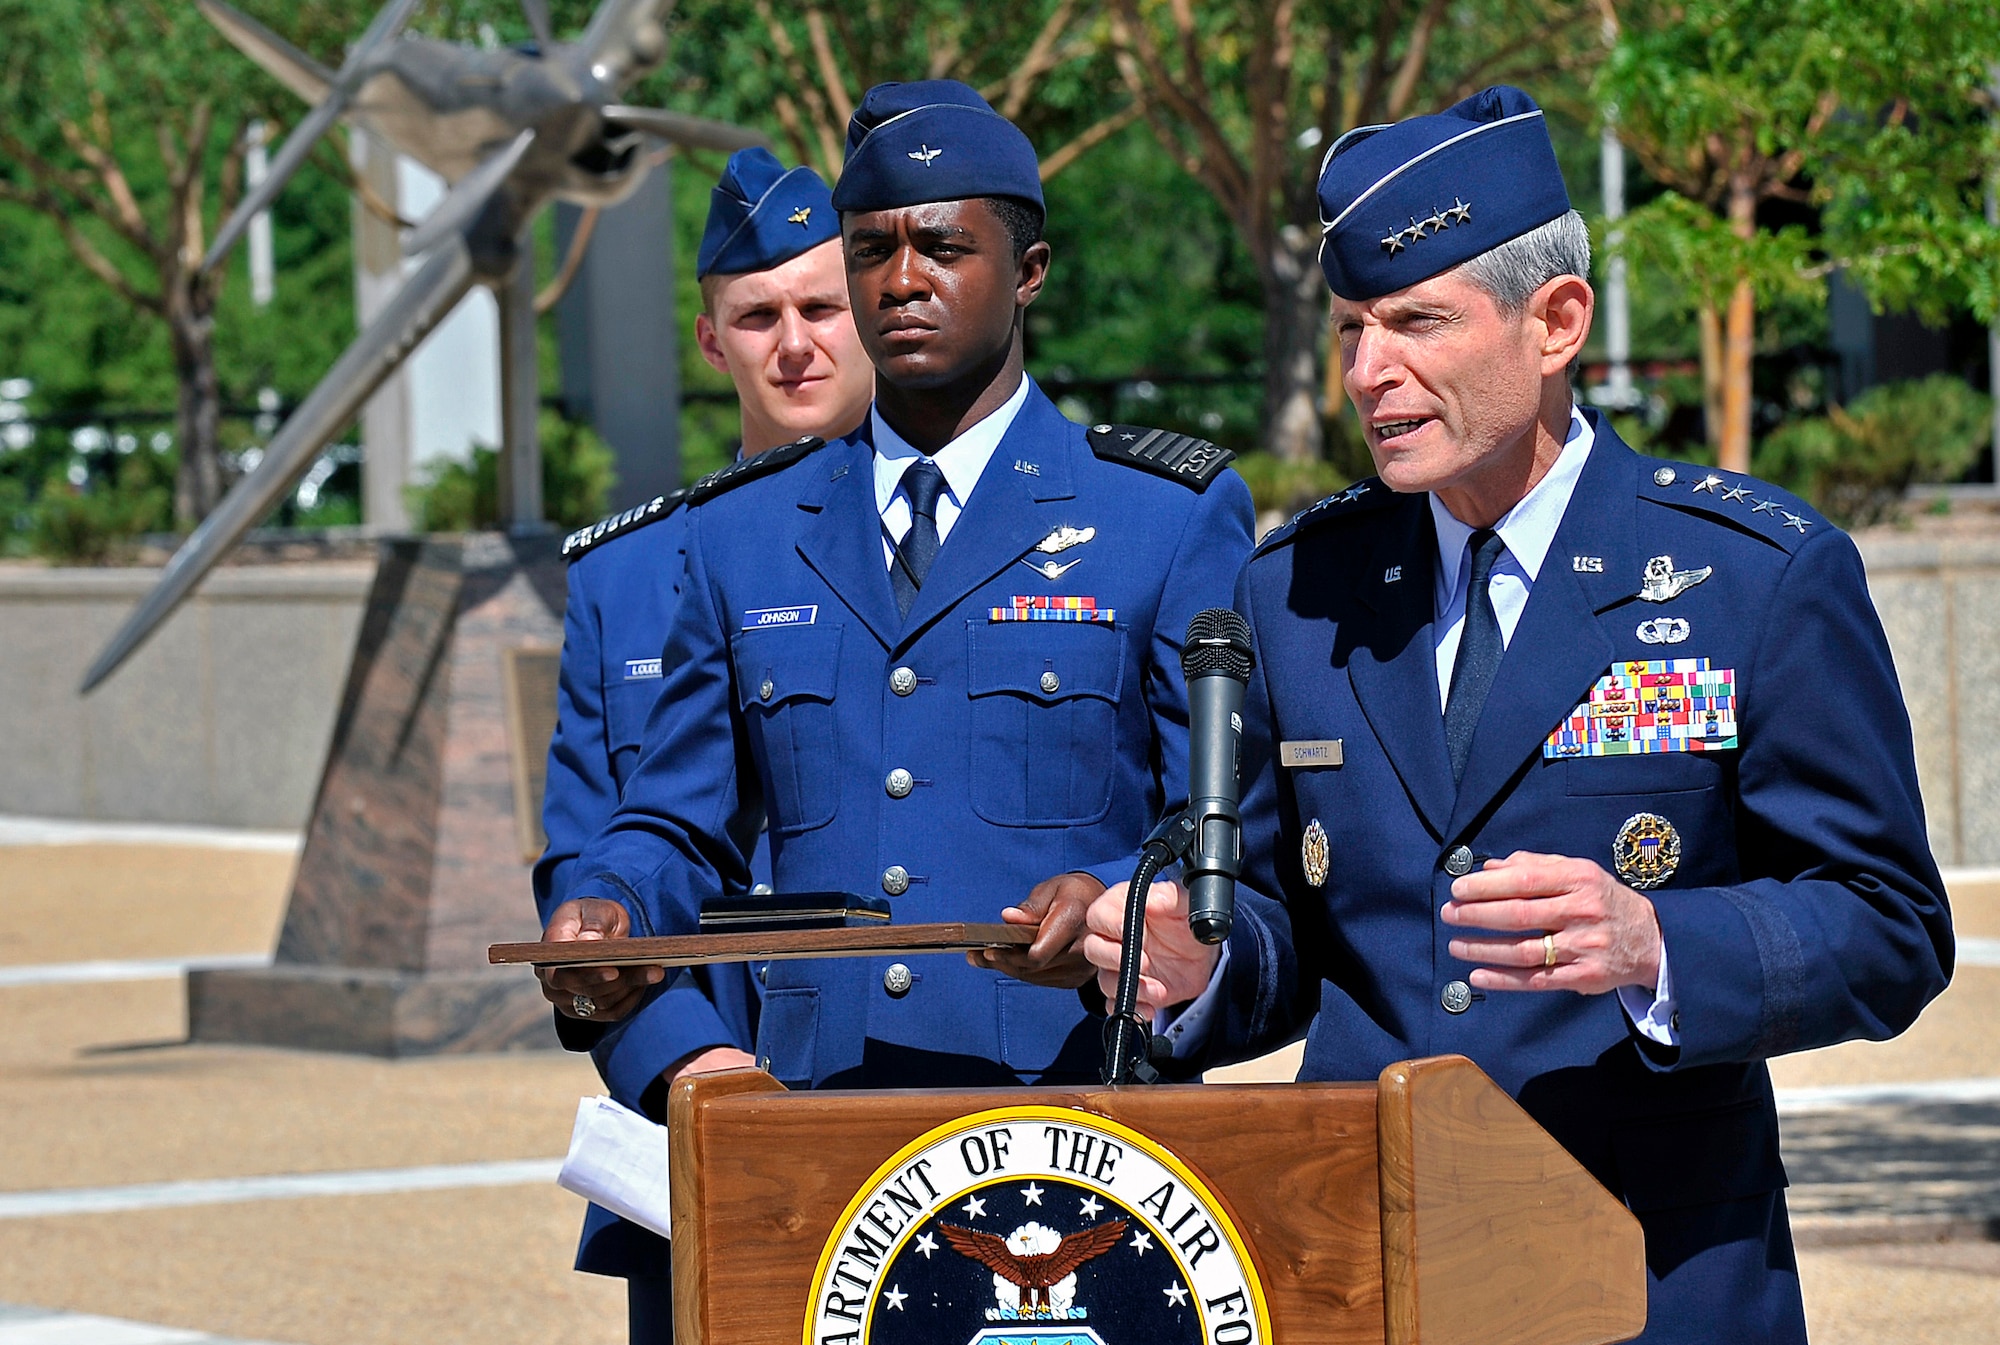 Air Force Chief of Staff Gen. Norton Schwartz, right, speaks at a ceremony to present a replacement Tuskegee Airmen medal replica to former 2nd Lt. Franklin Macon at the Air Force Academy July 22, 2011. Macon, one of the original Tuskegee Airmen, lost his medal replica in a home burglary May 31. Cadet 1st Class Frederick Johnson of Cadet Squadron 14, center, served as proffer. Cadet 1st Class Kevin Loudermilk of CS 10, left, was the master of ceremonies. (U.S. Air Force photo/Ray McCoy)